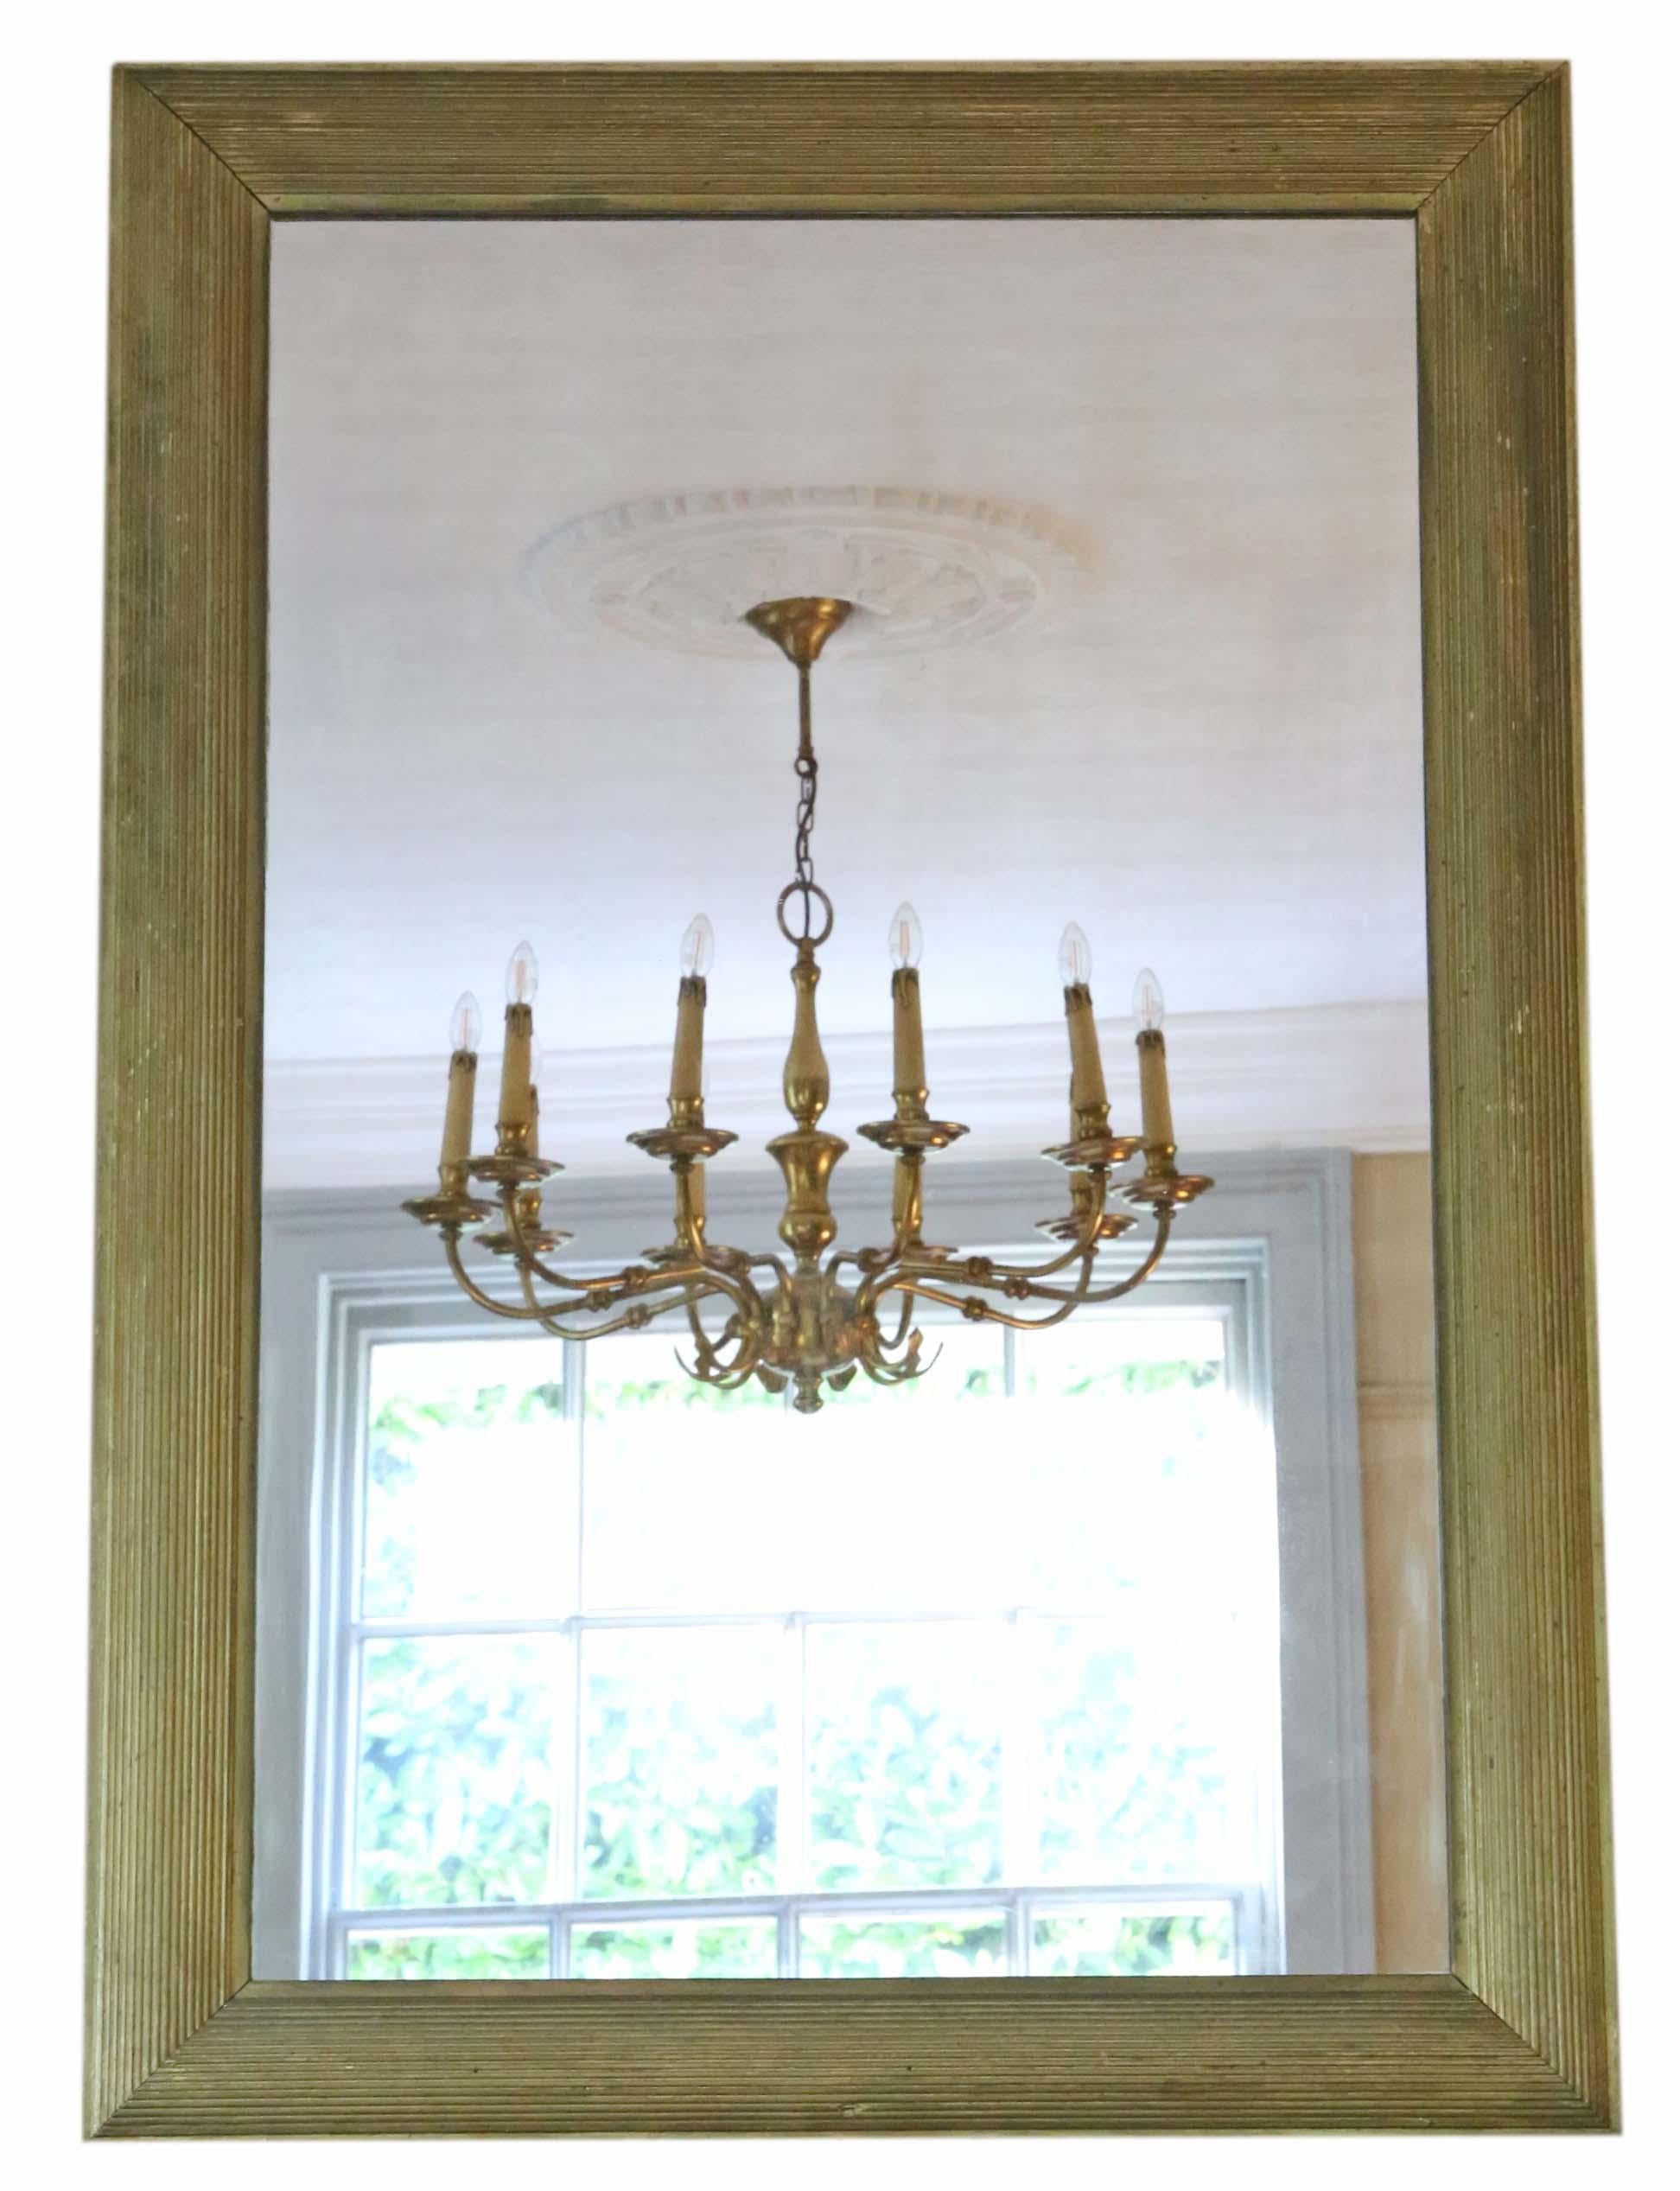 Antique Large Quality Gilt Overmantel or Wall Mirror circa 1900-1920 Art Deco 3